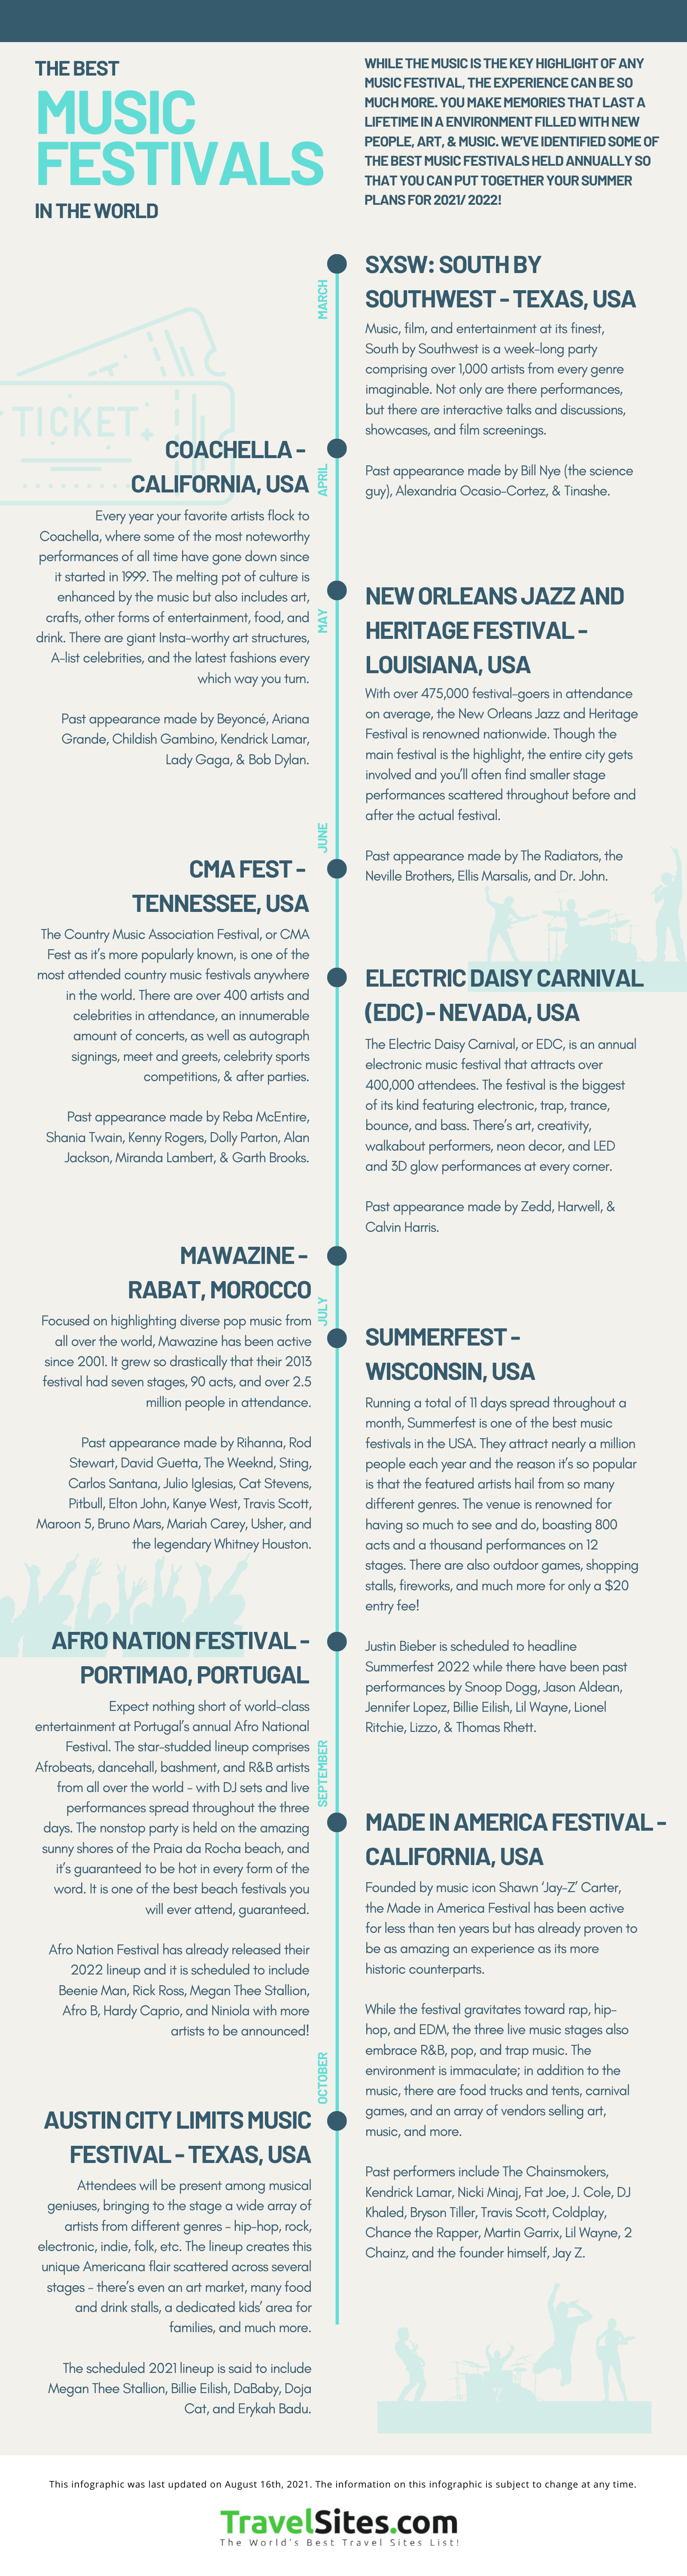 The Best Music Festivals in the World